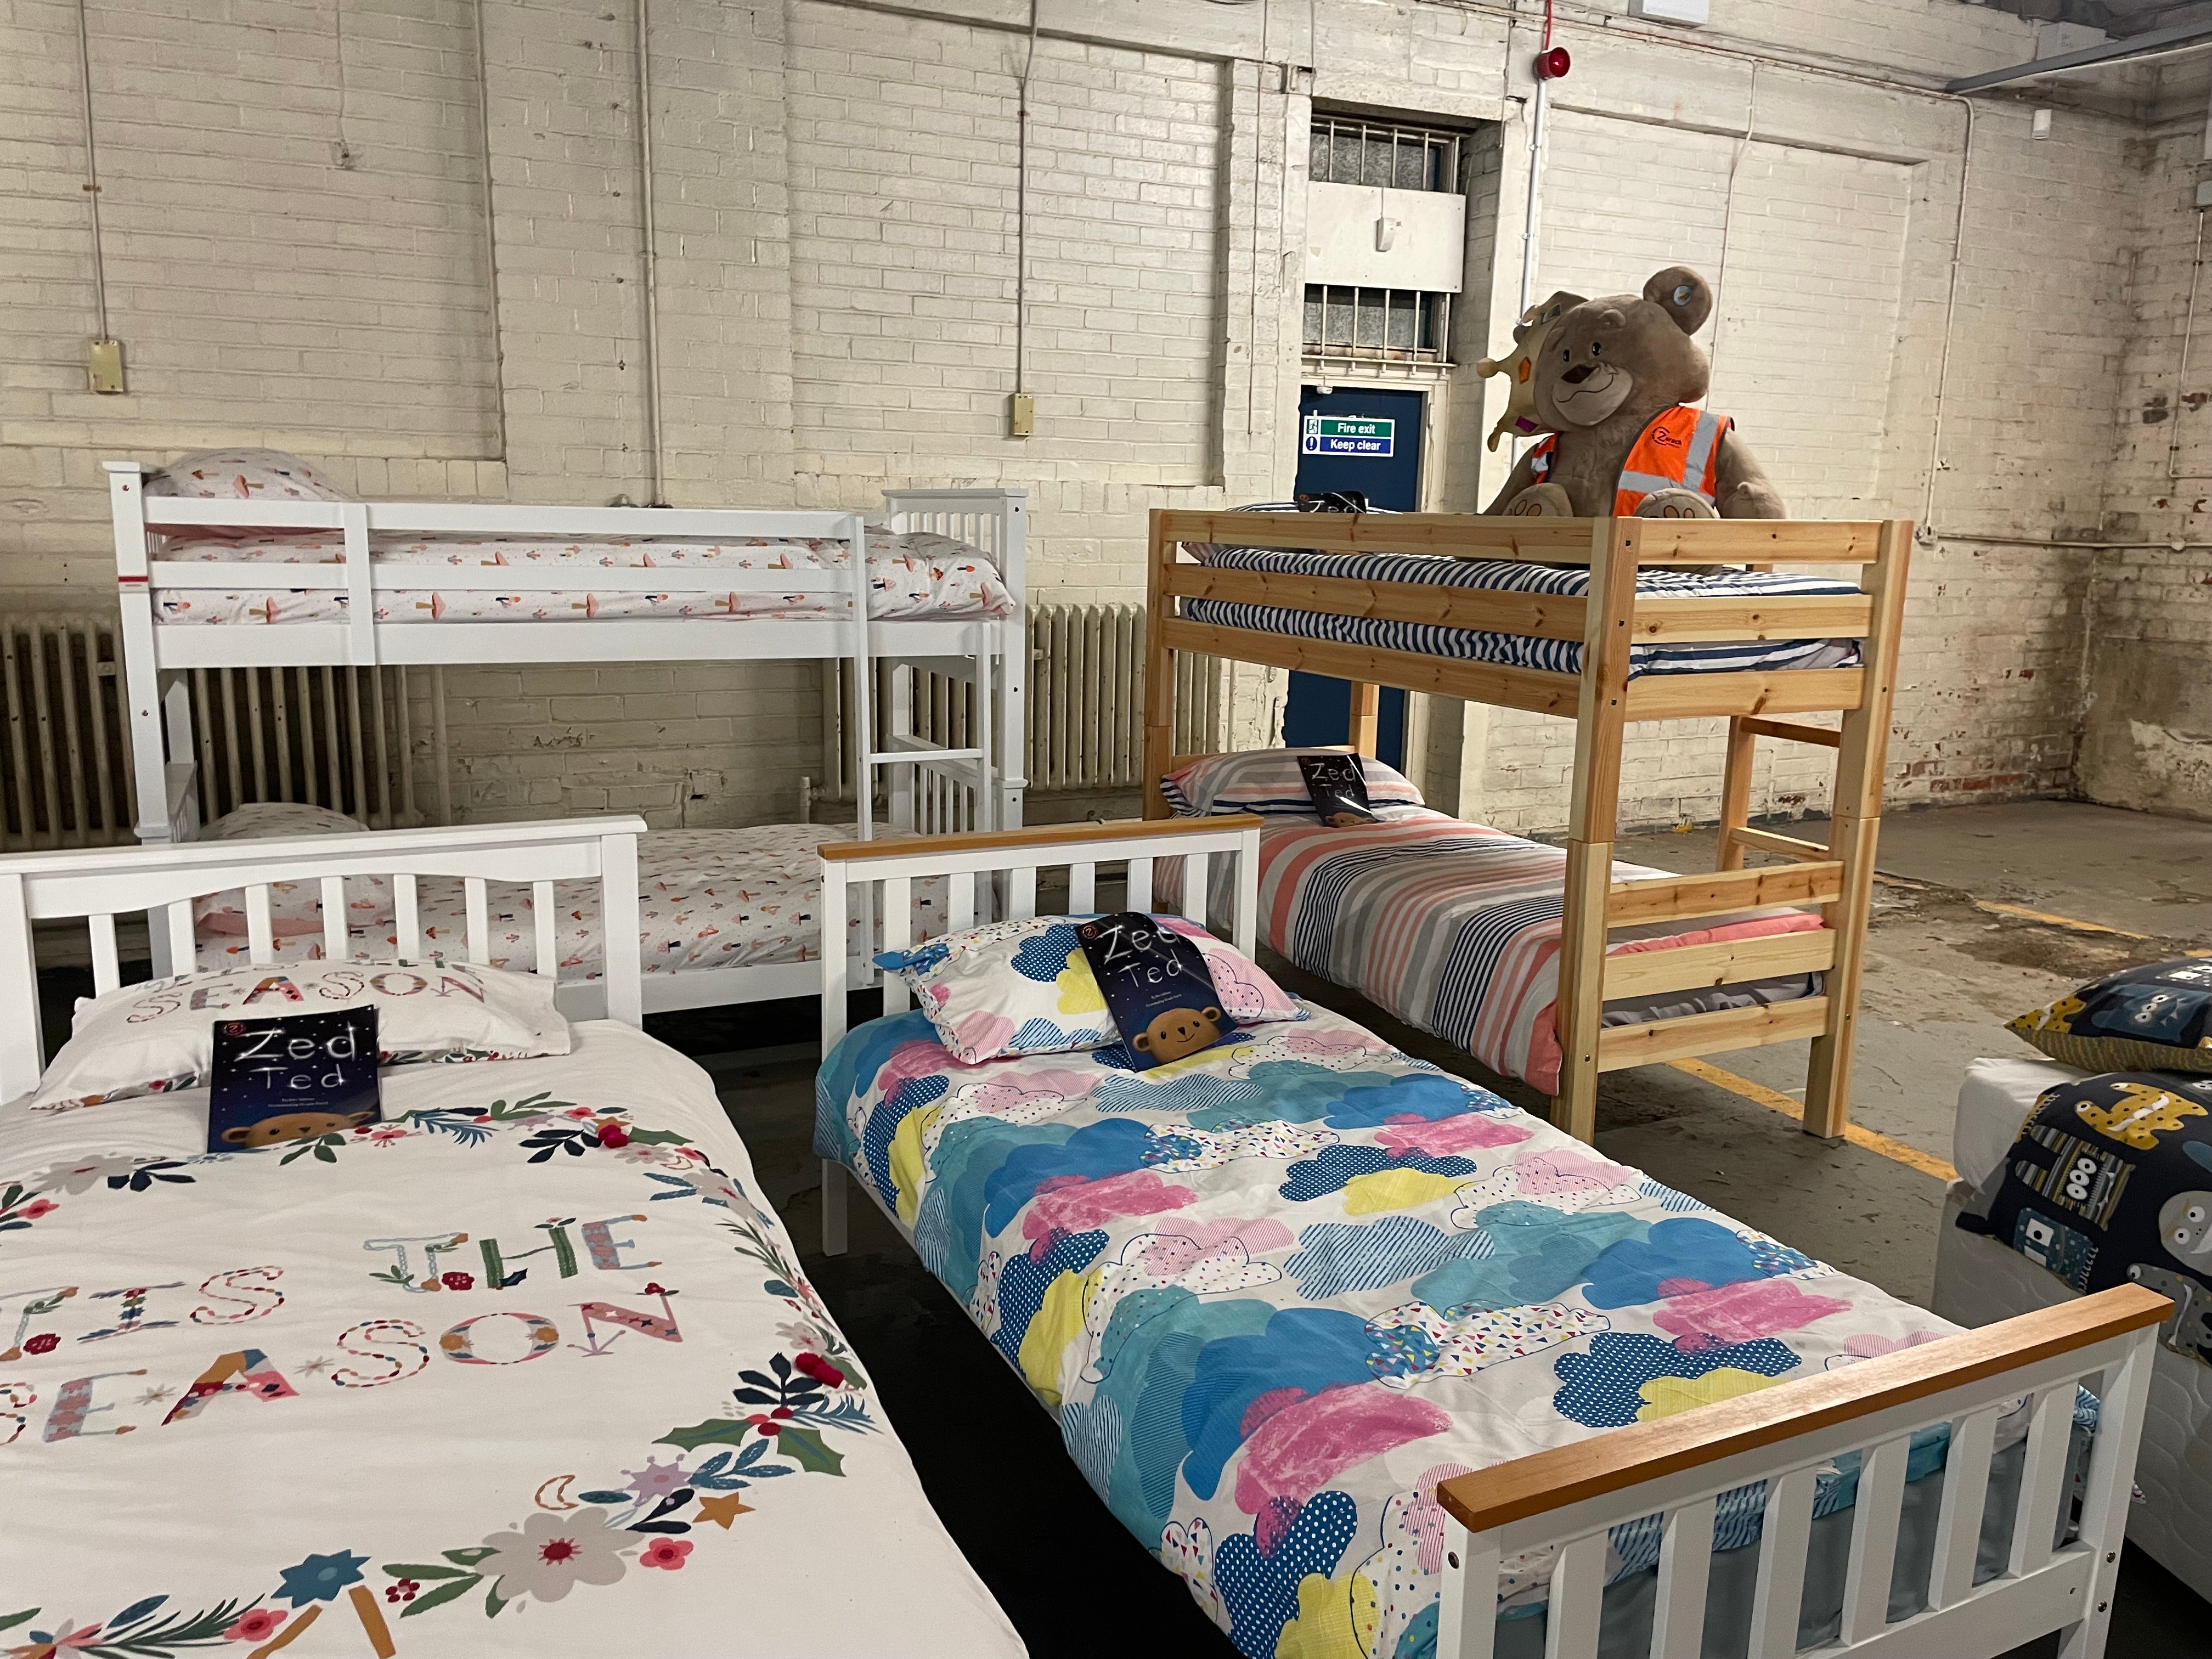 Zarach is aiming to provide 500 beds to children this December